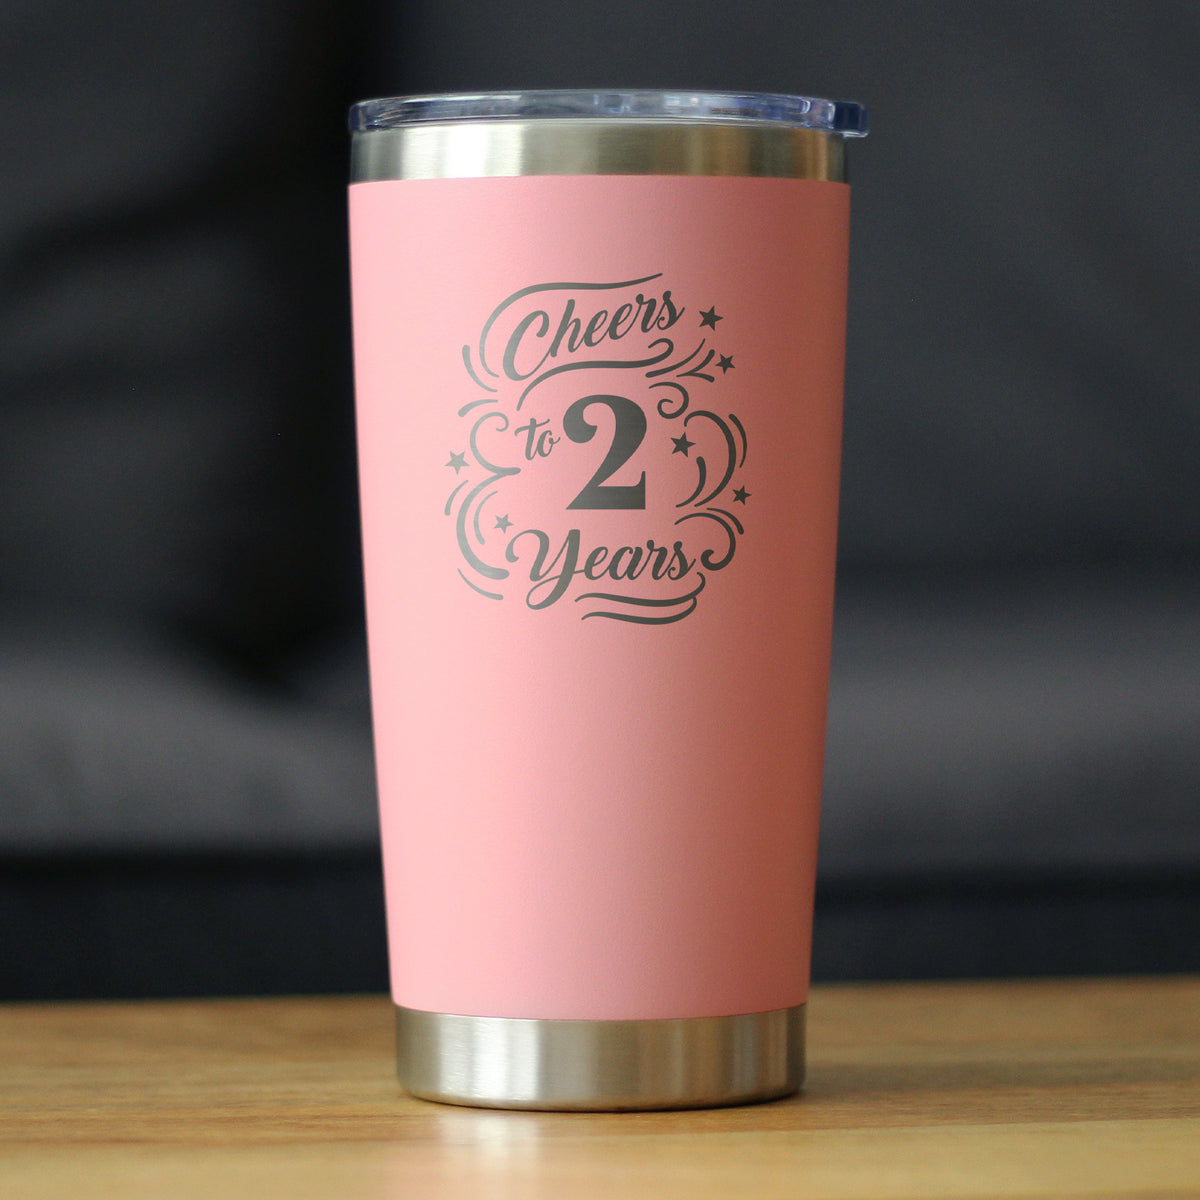 Cheers to 2 Years - Insulated Coffee Tumbler Cup with Sliding Lid - Stainless Steel Insulated Mug - 2nd Anniversary Gifts and Party Decor